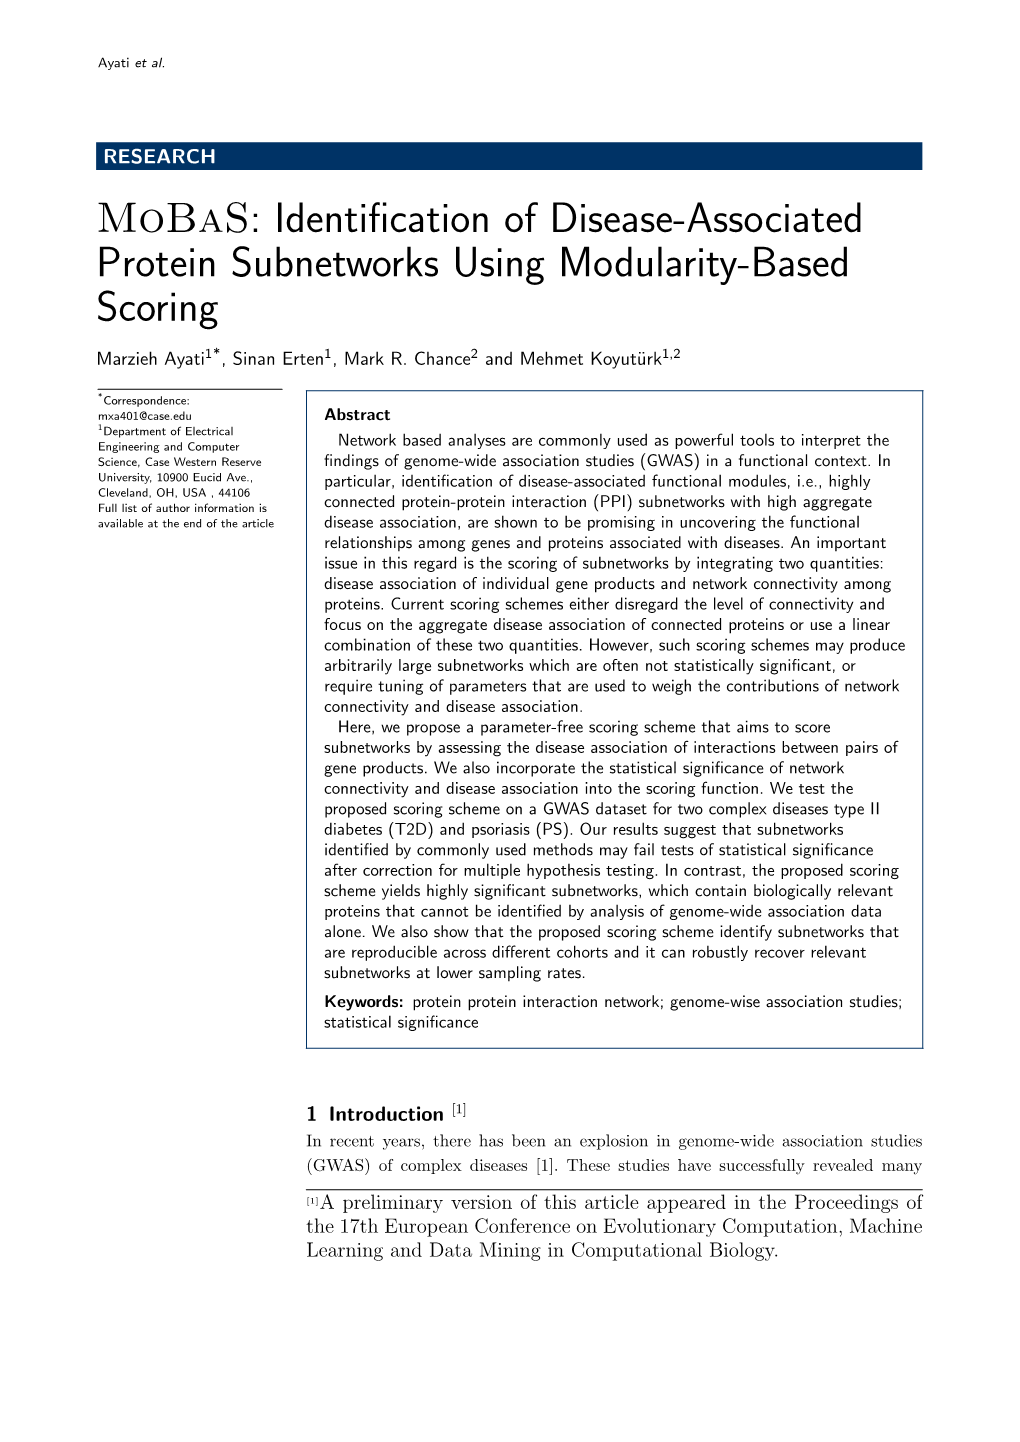 Mobas: Identiﬁcation of Disease-Associated Protein Subnetworks Using Modularity-Based Scoring